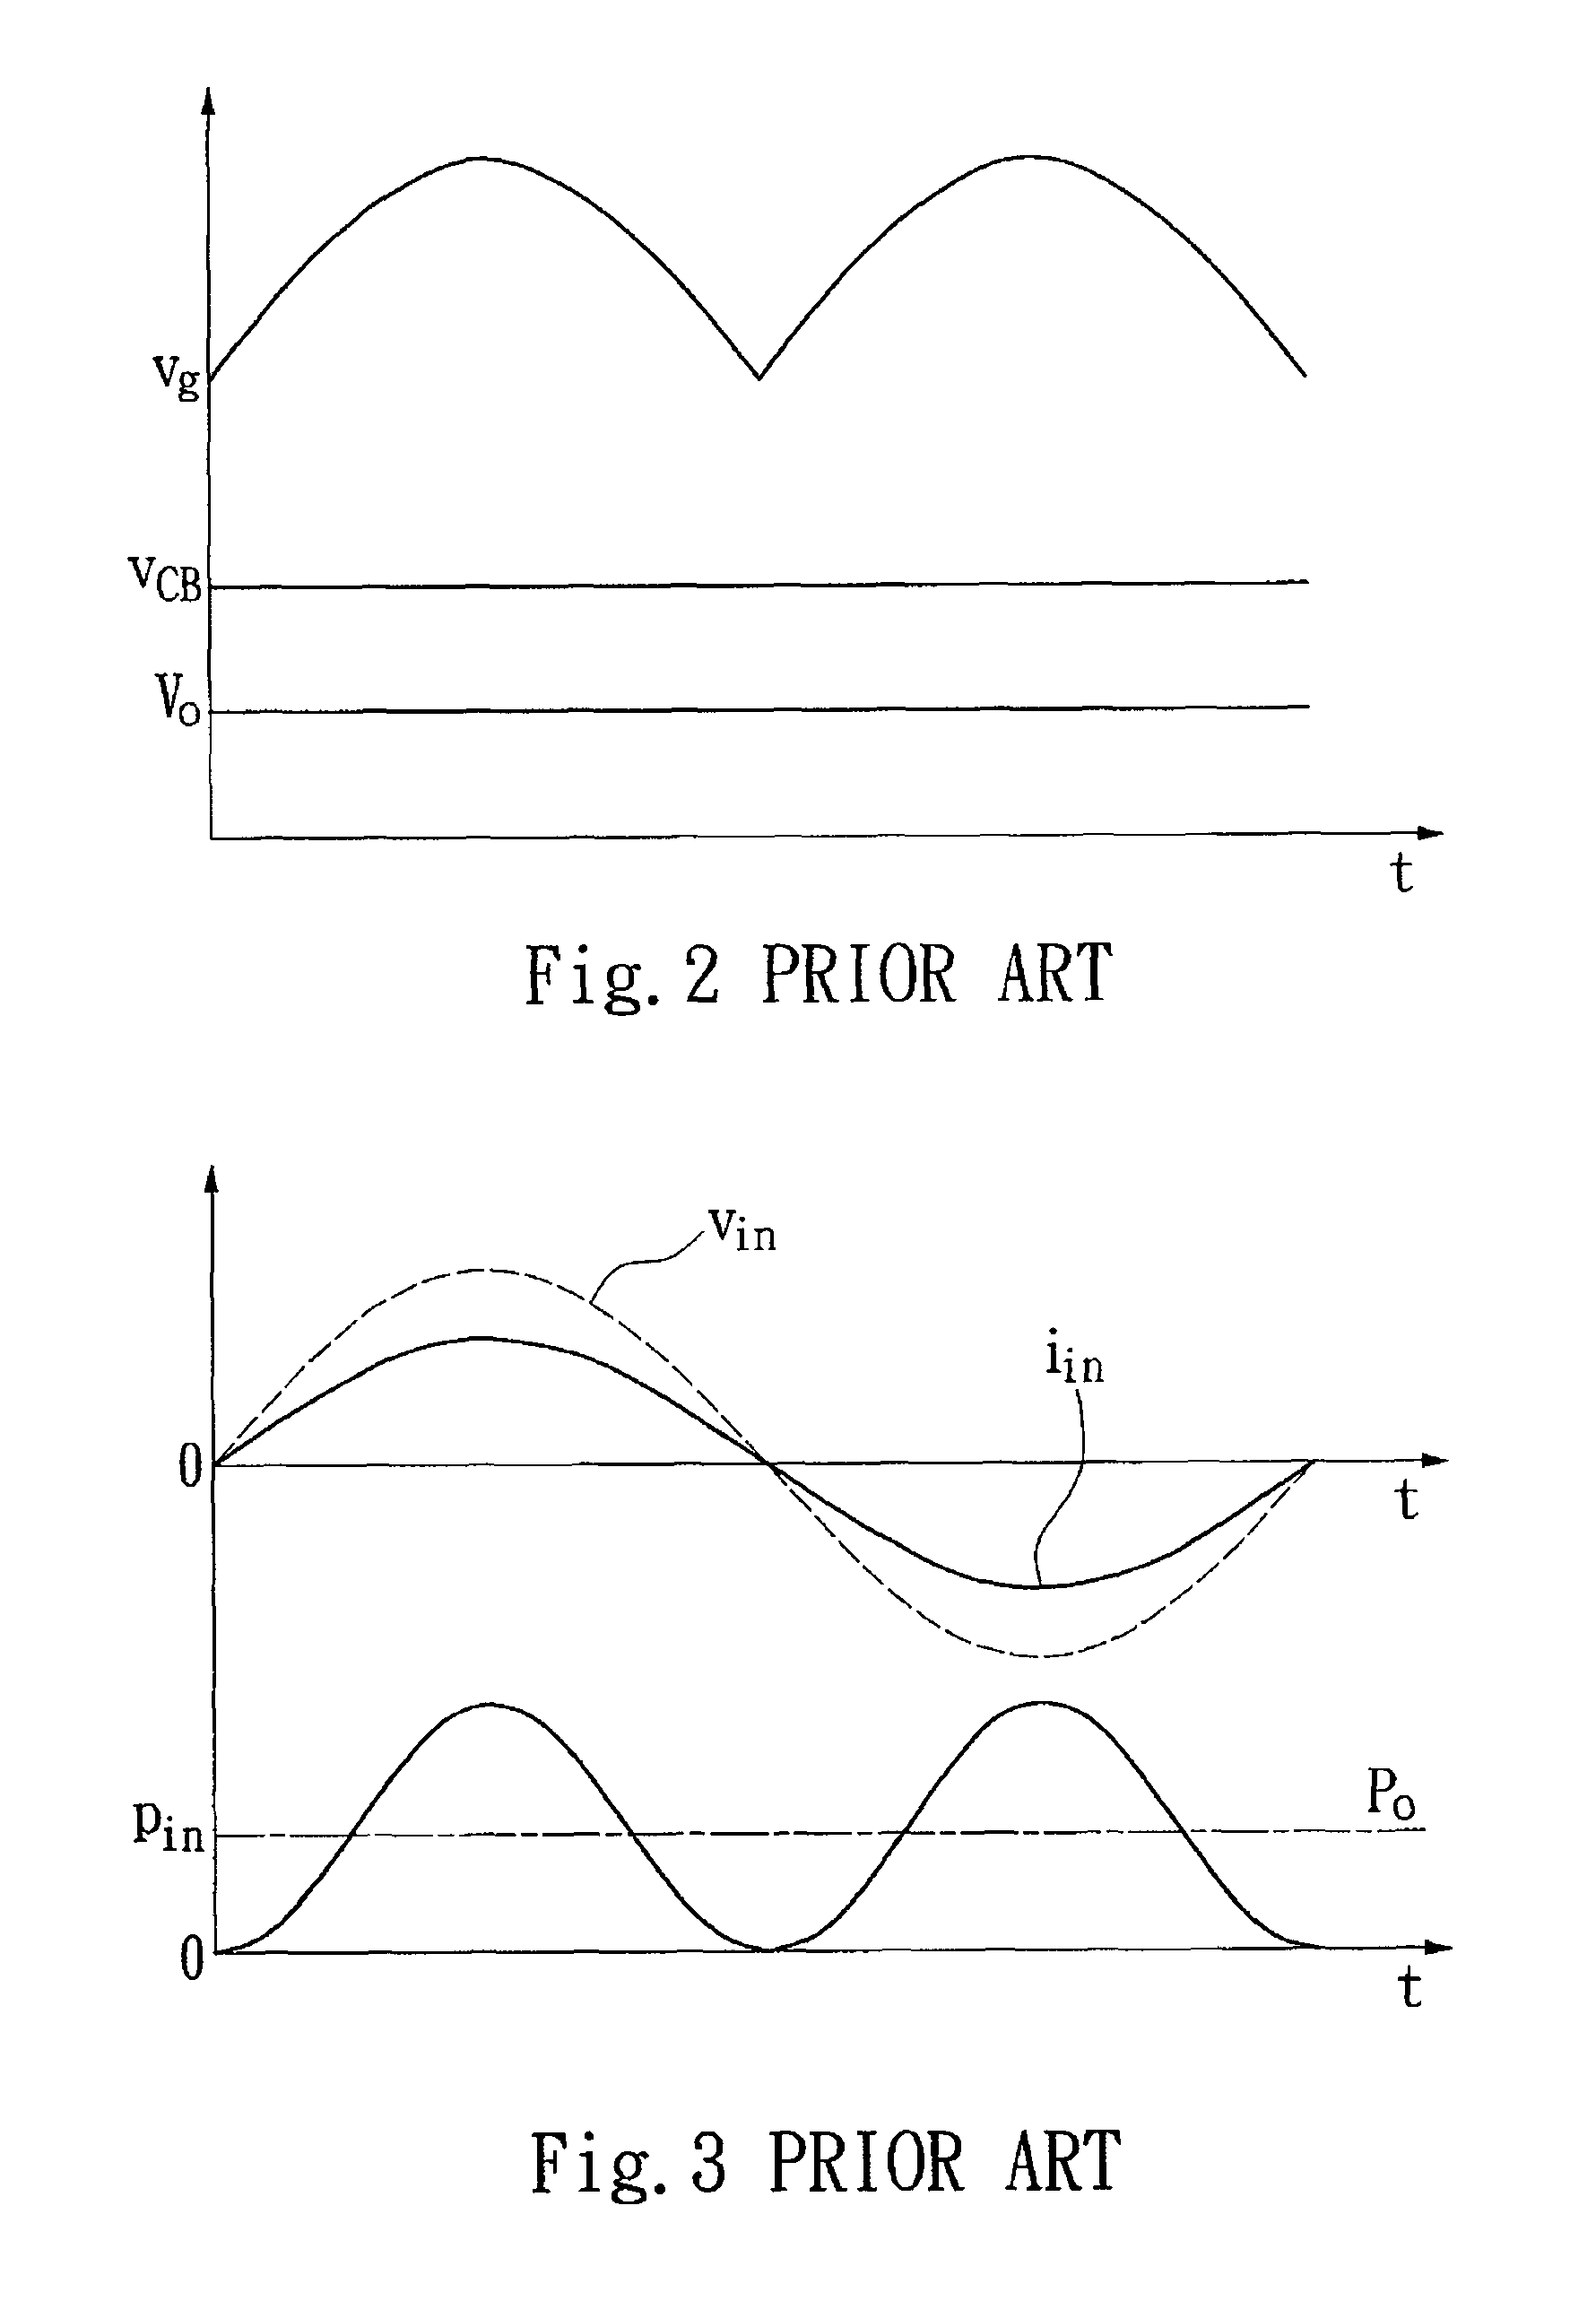 Means of eliminating electrolytic capacitor as the energy storage component in the single phase AD/DC two-stage converter